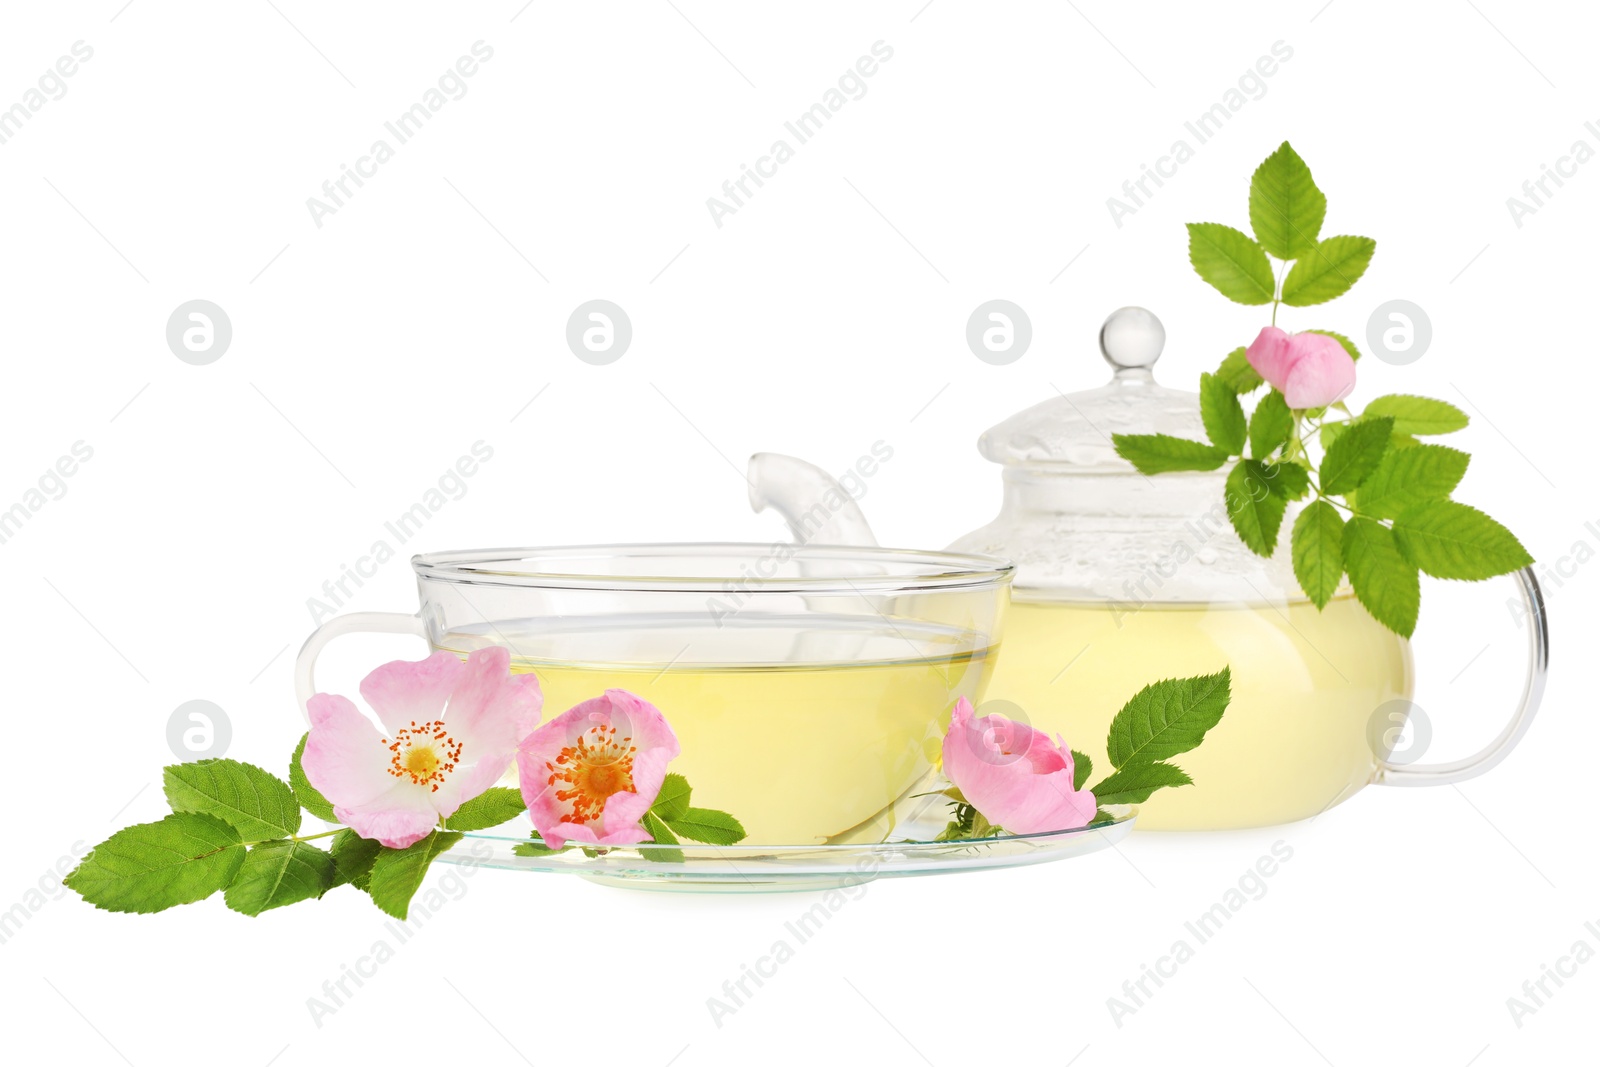 Photo of Aromatic herbal tea in glass cup, teapot, flowers and green leaves isolated on white